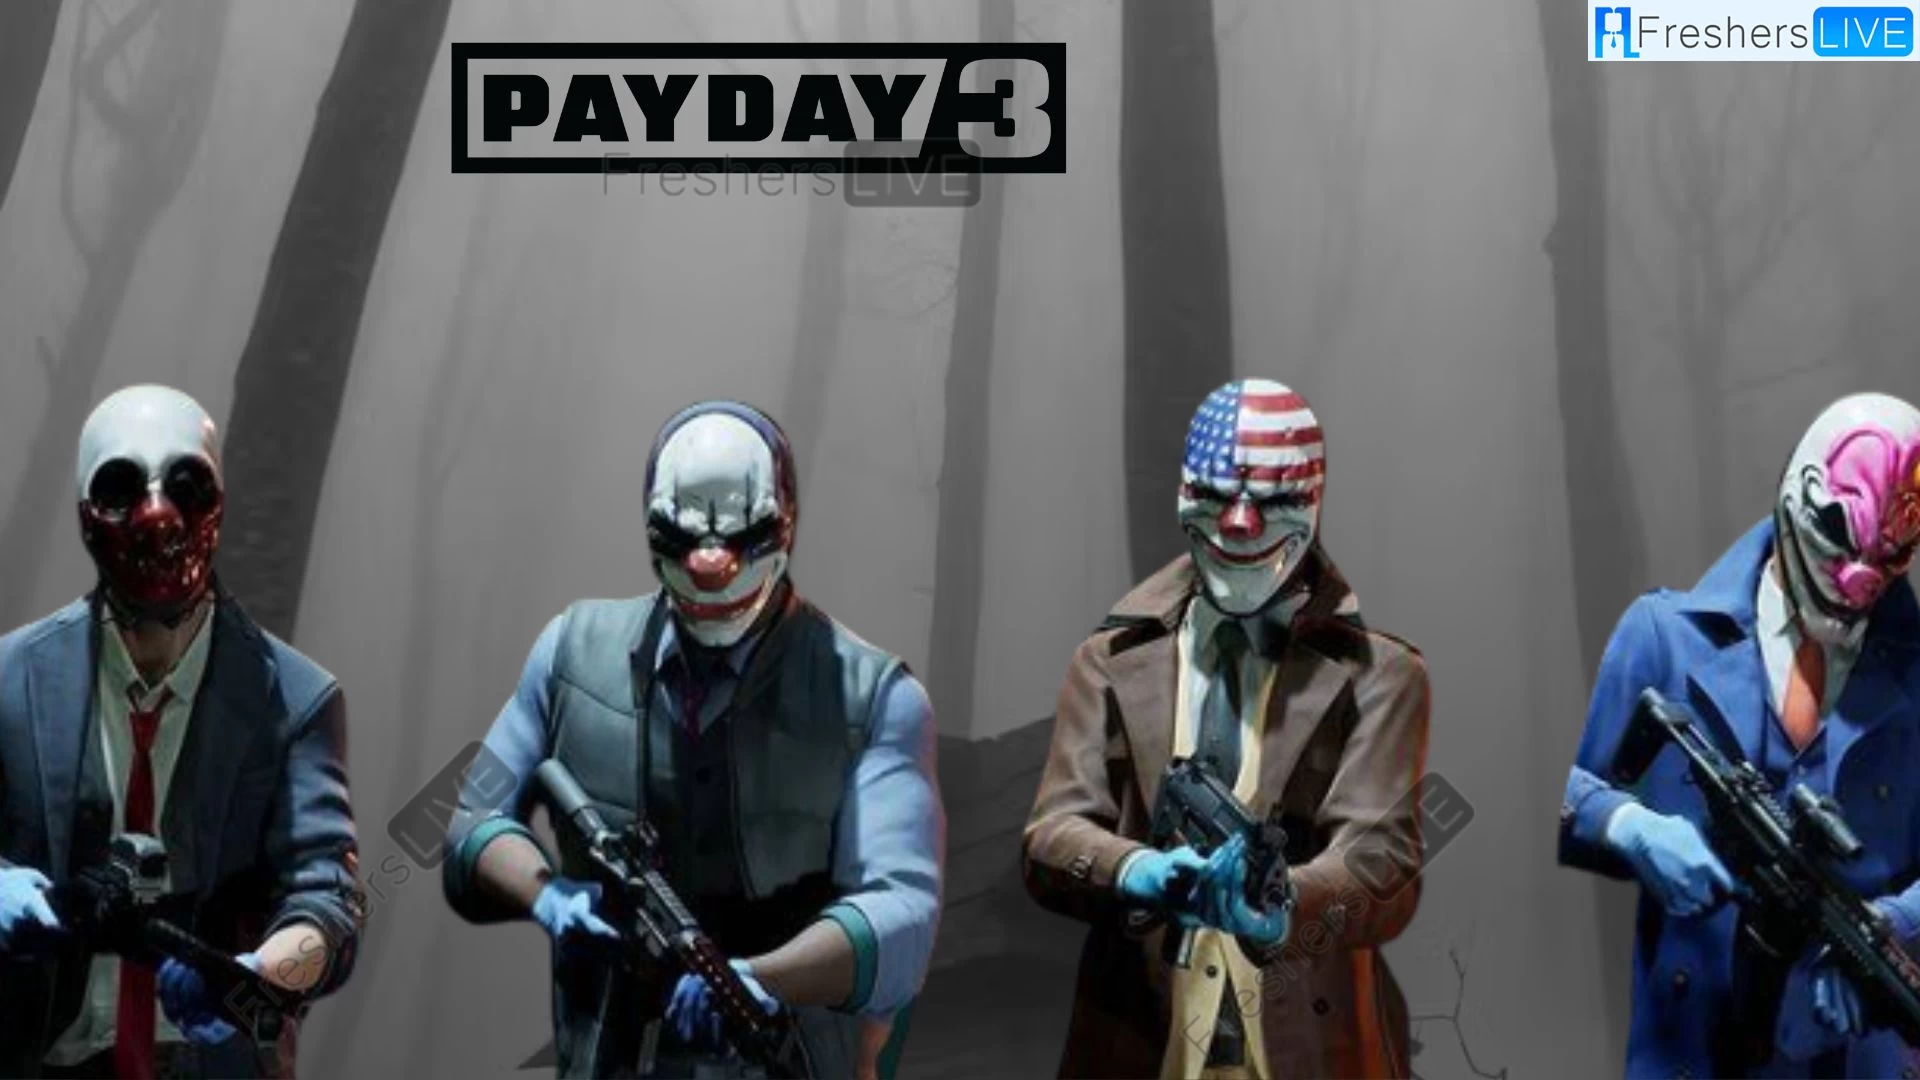 How to Disable Cameras in Payday 3? Find Out Here